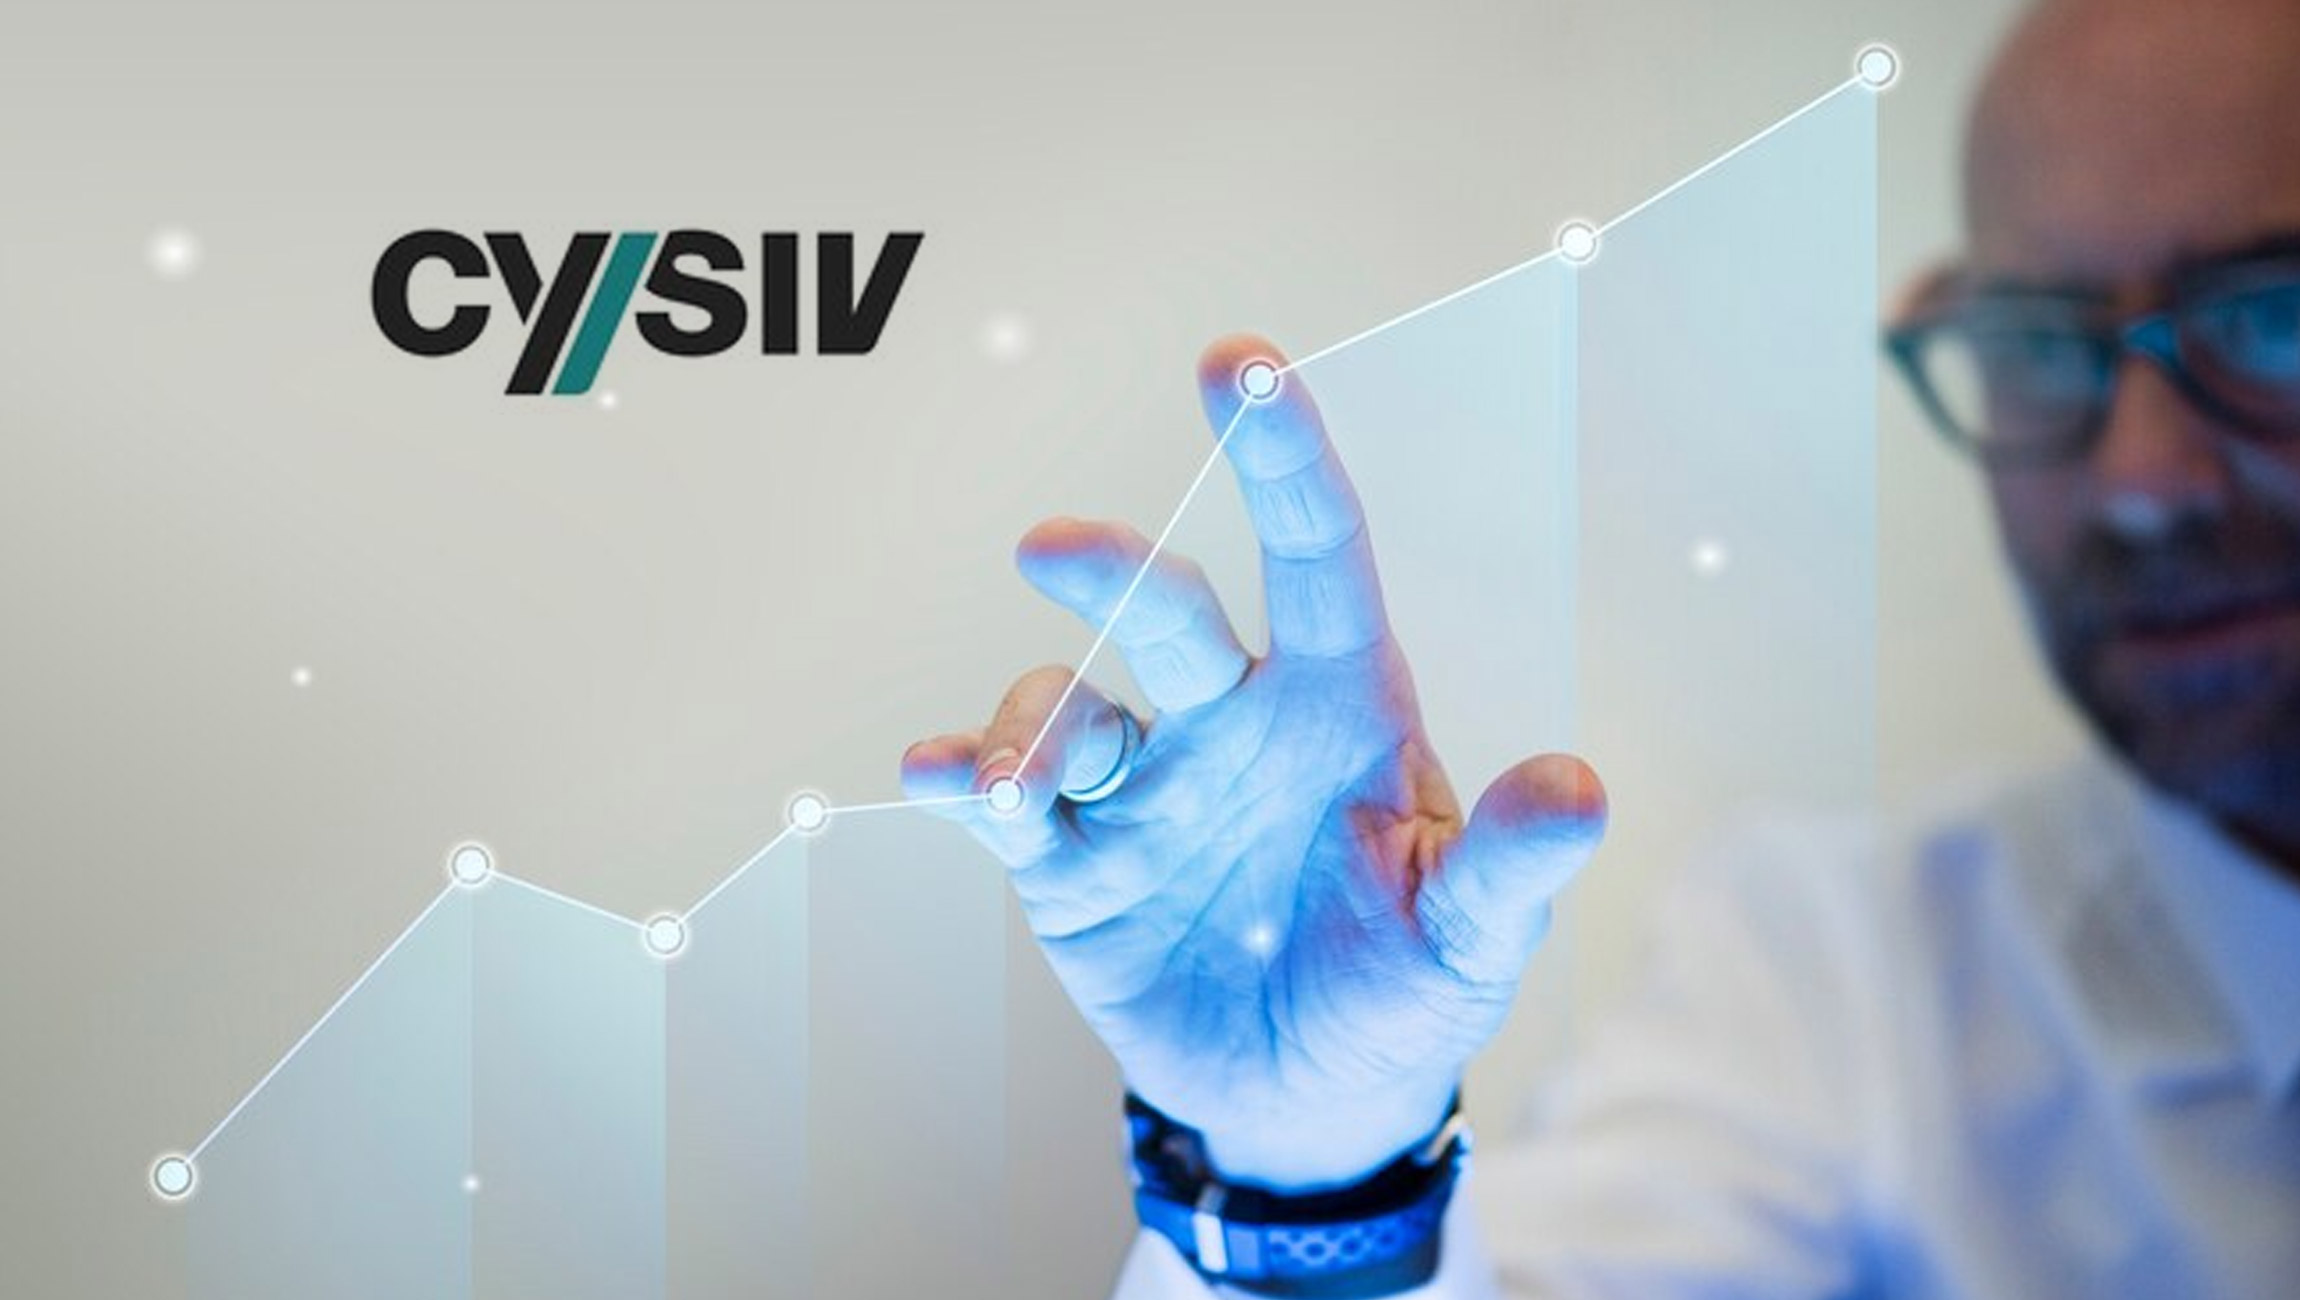 Cysiv Experiences Record Growth as Demand for SOC-as-a-Service Accelerates